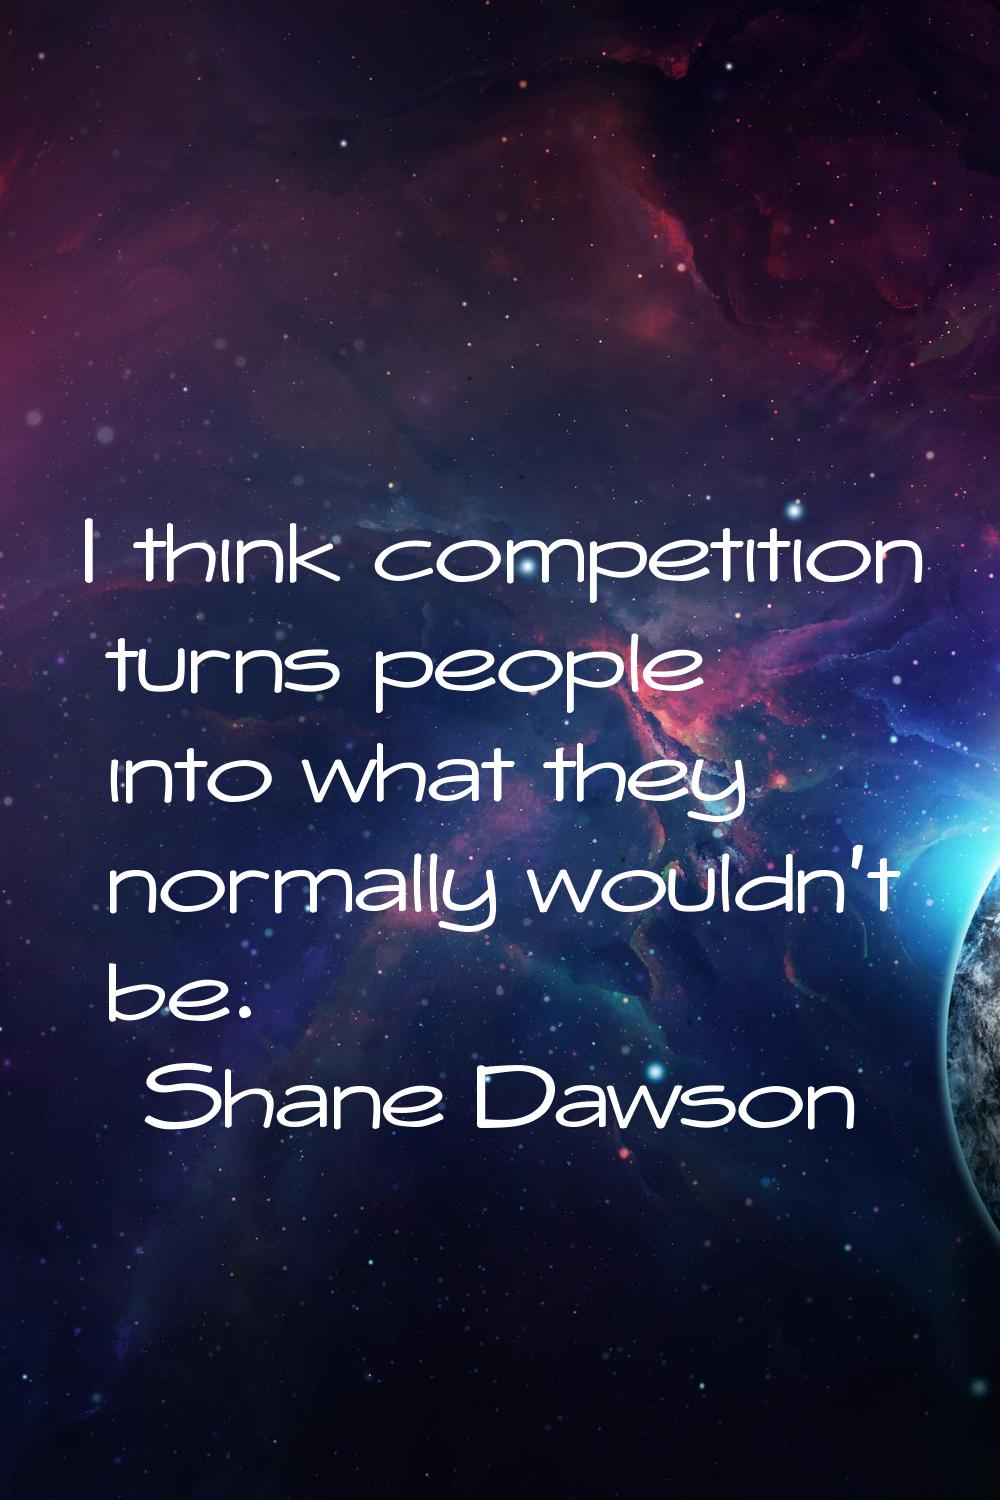 I think competition turns people into what they normally wouldn't be.